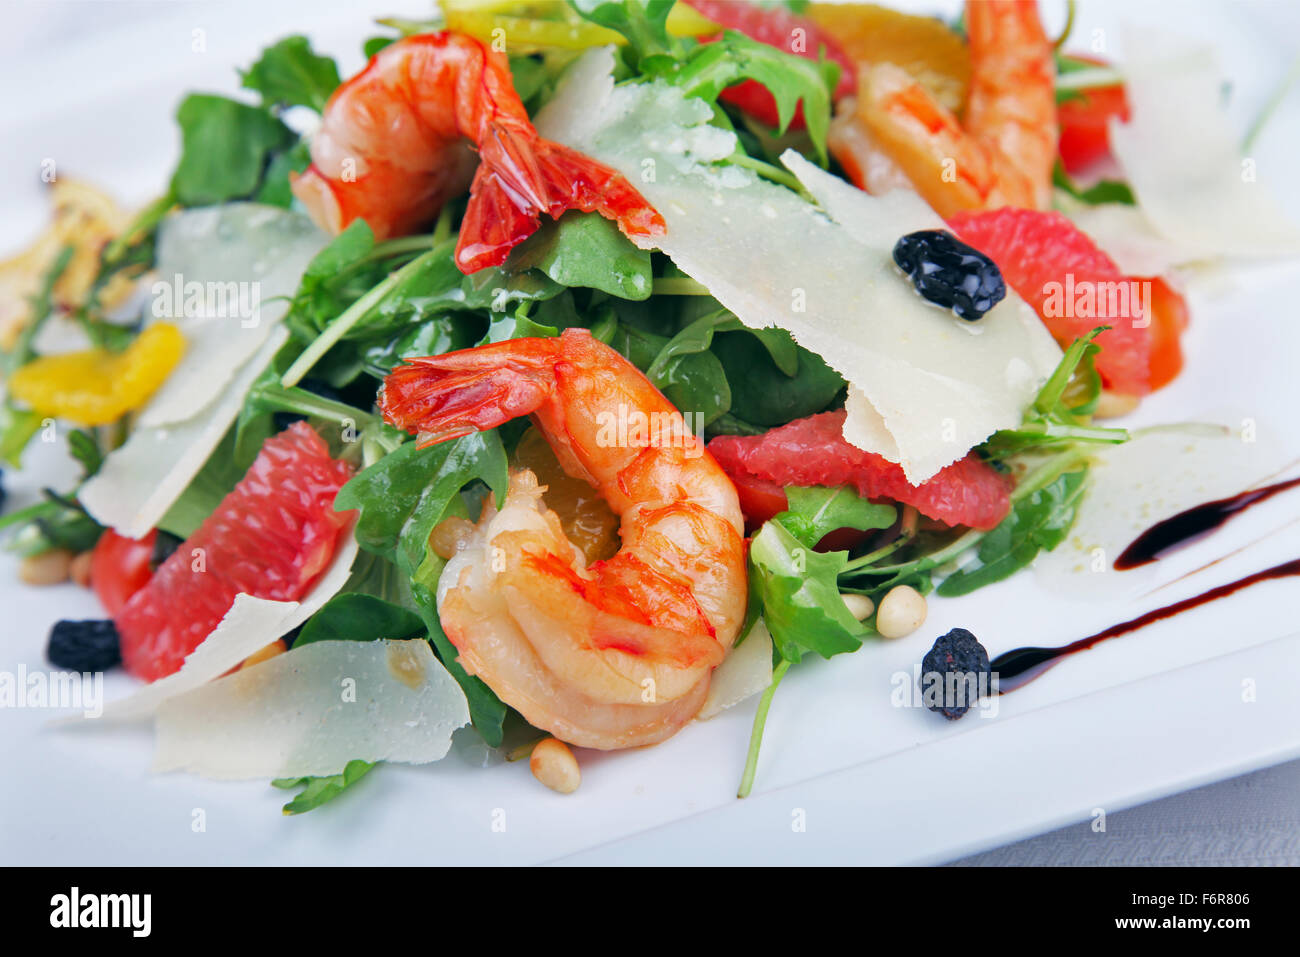 Big shrimp and green salad with cheese on plate Stock Photo